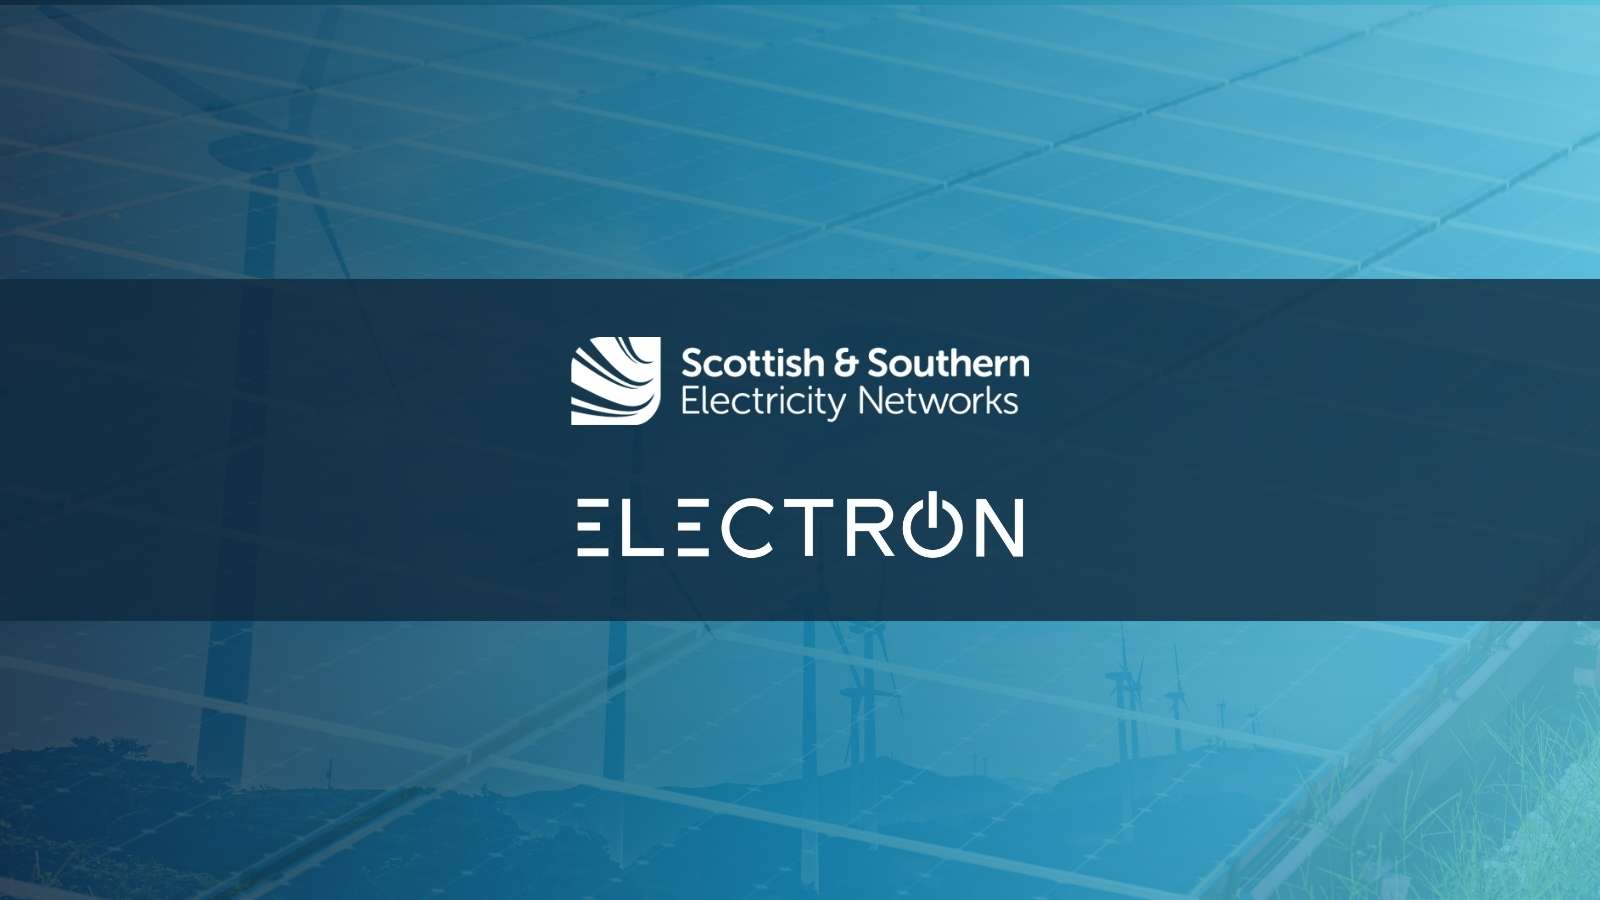 Press release: SSEN selects Electron’s next-generation flexibility market platform to power its continued growth